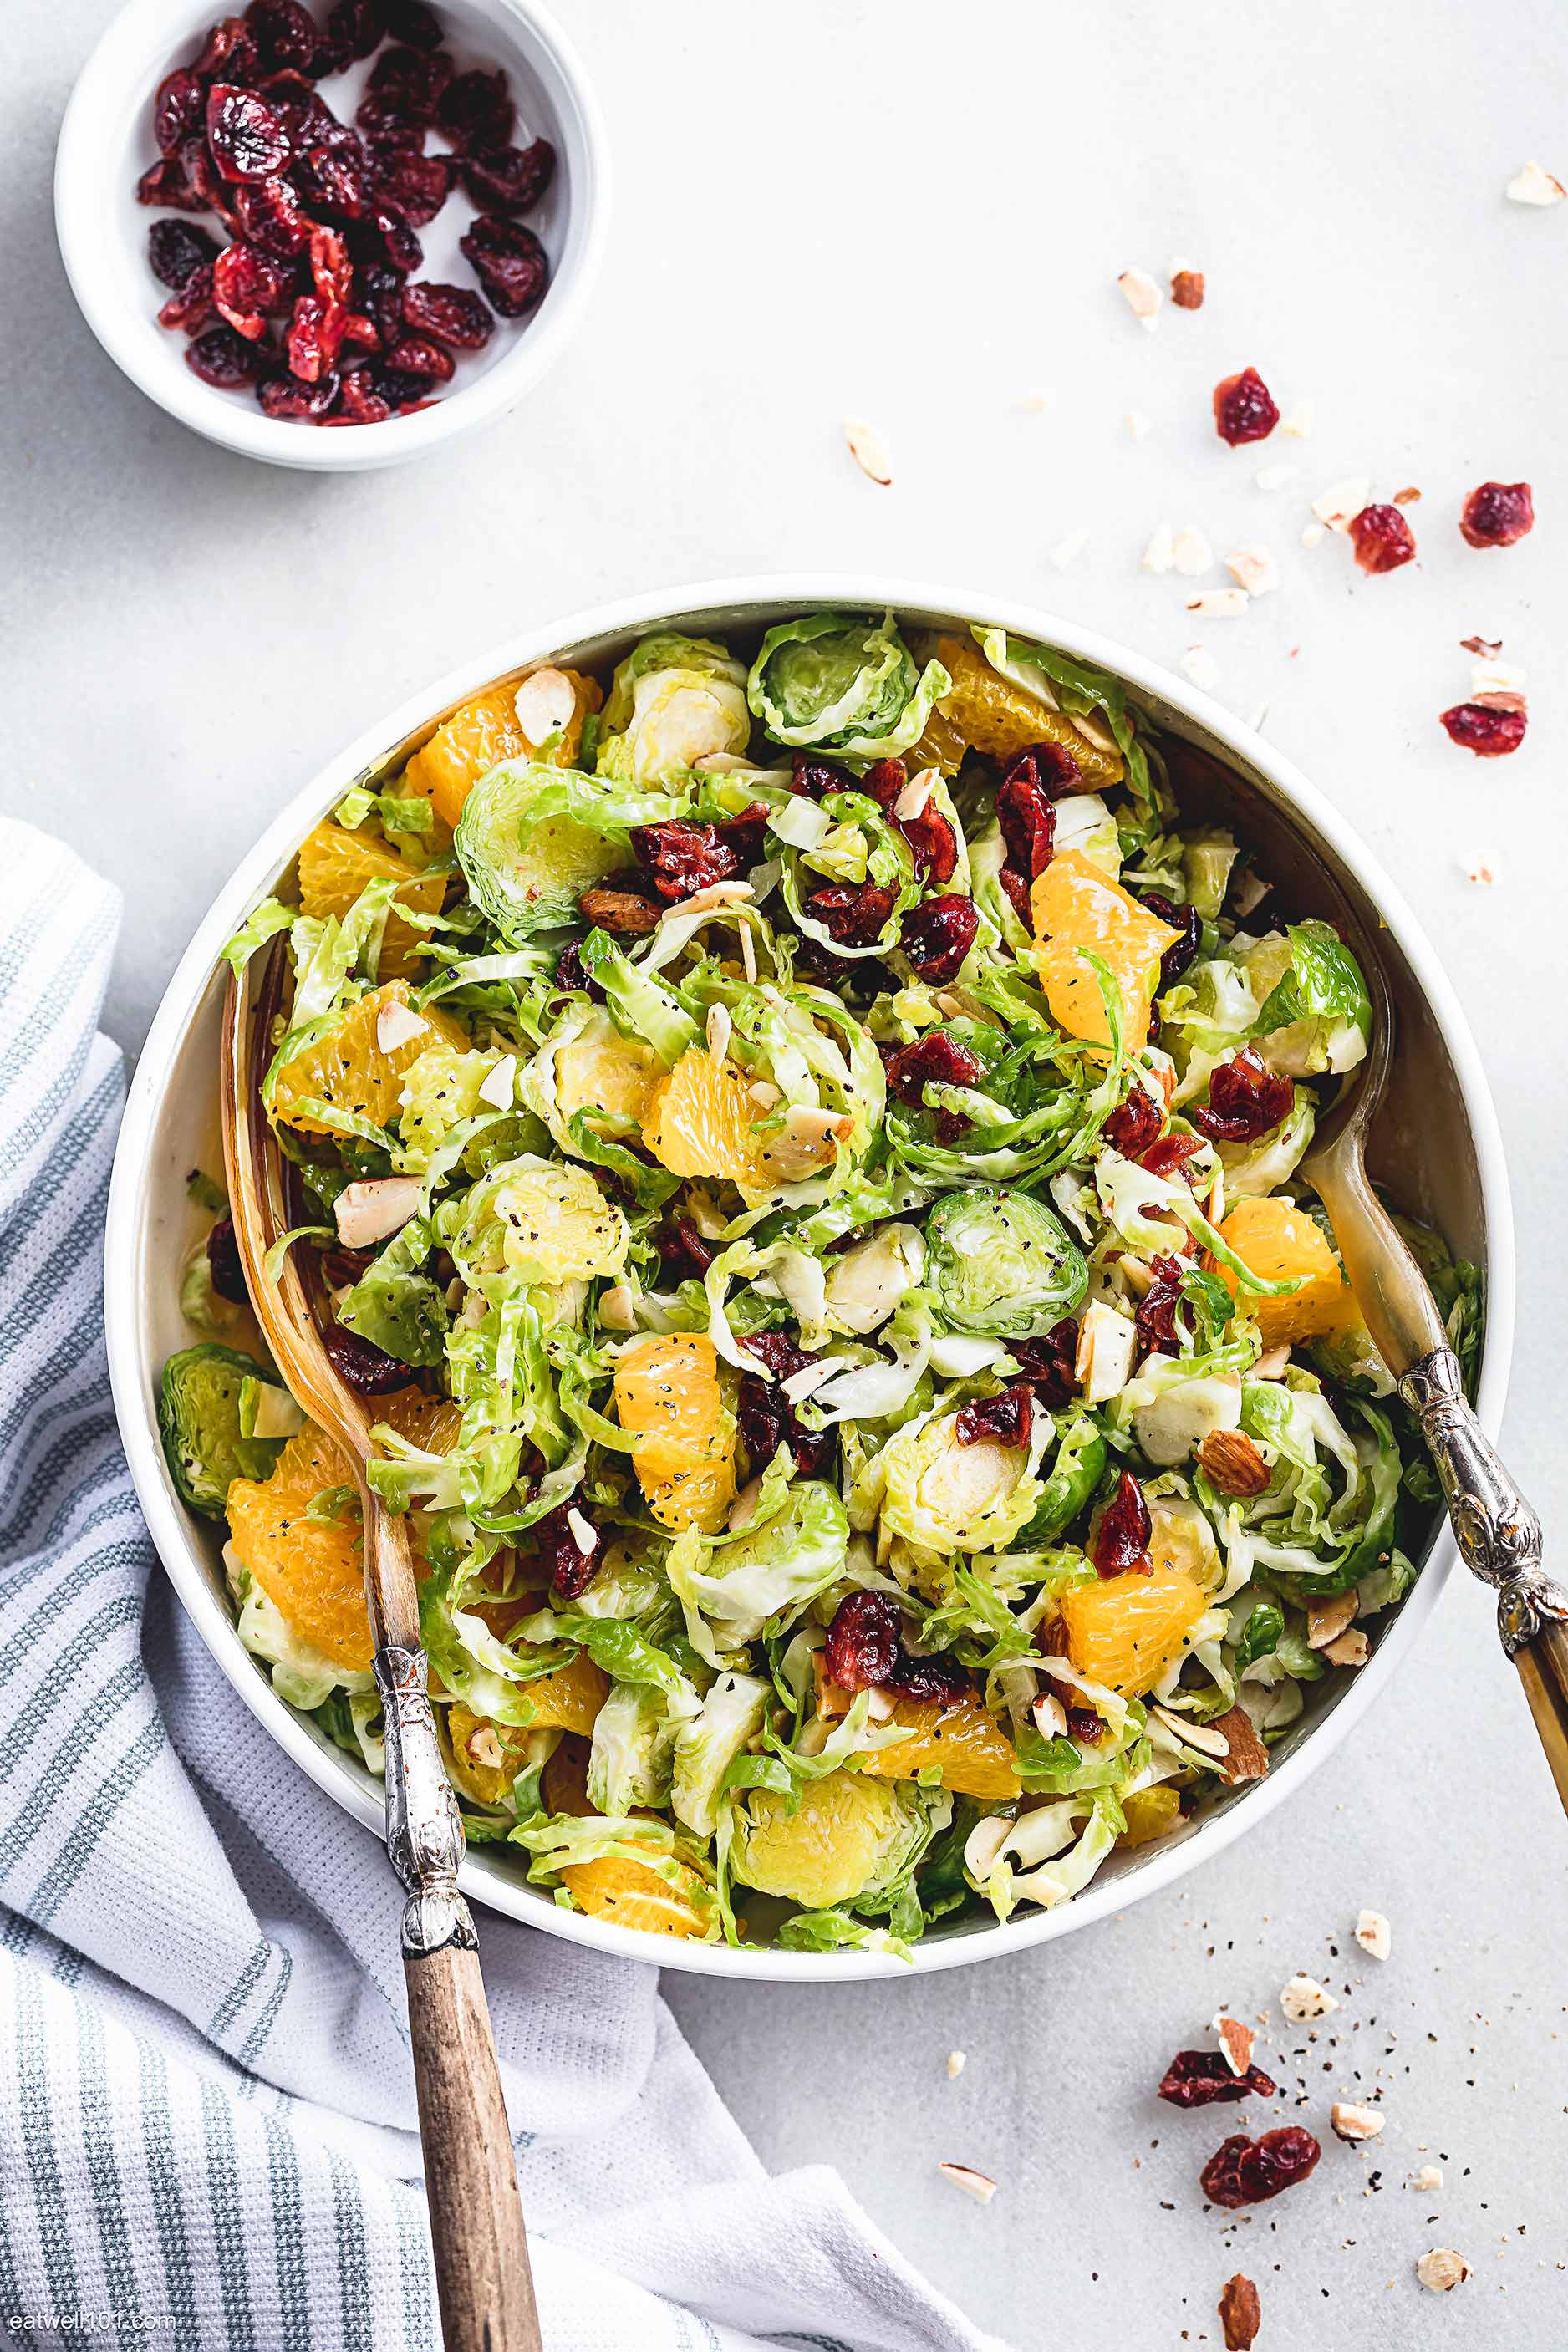 How to Make Brussels Sprout Salad